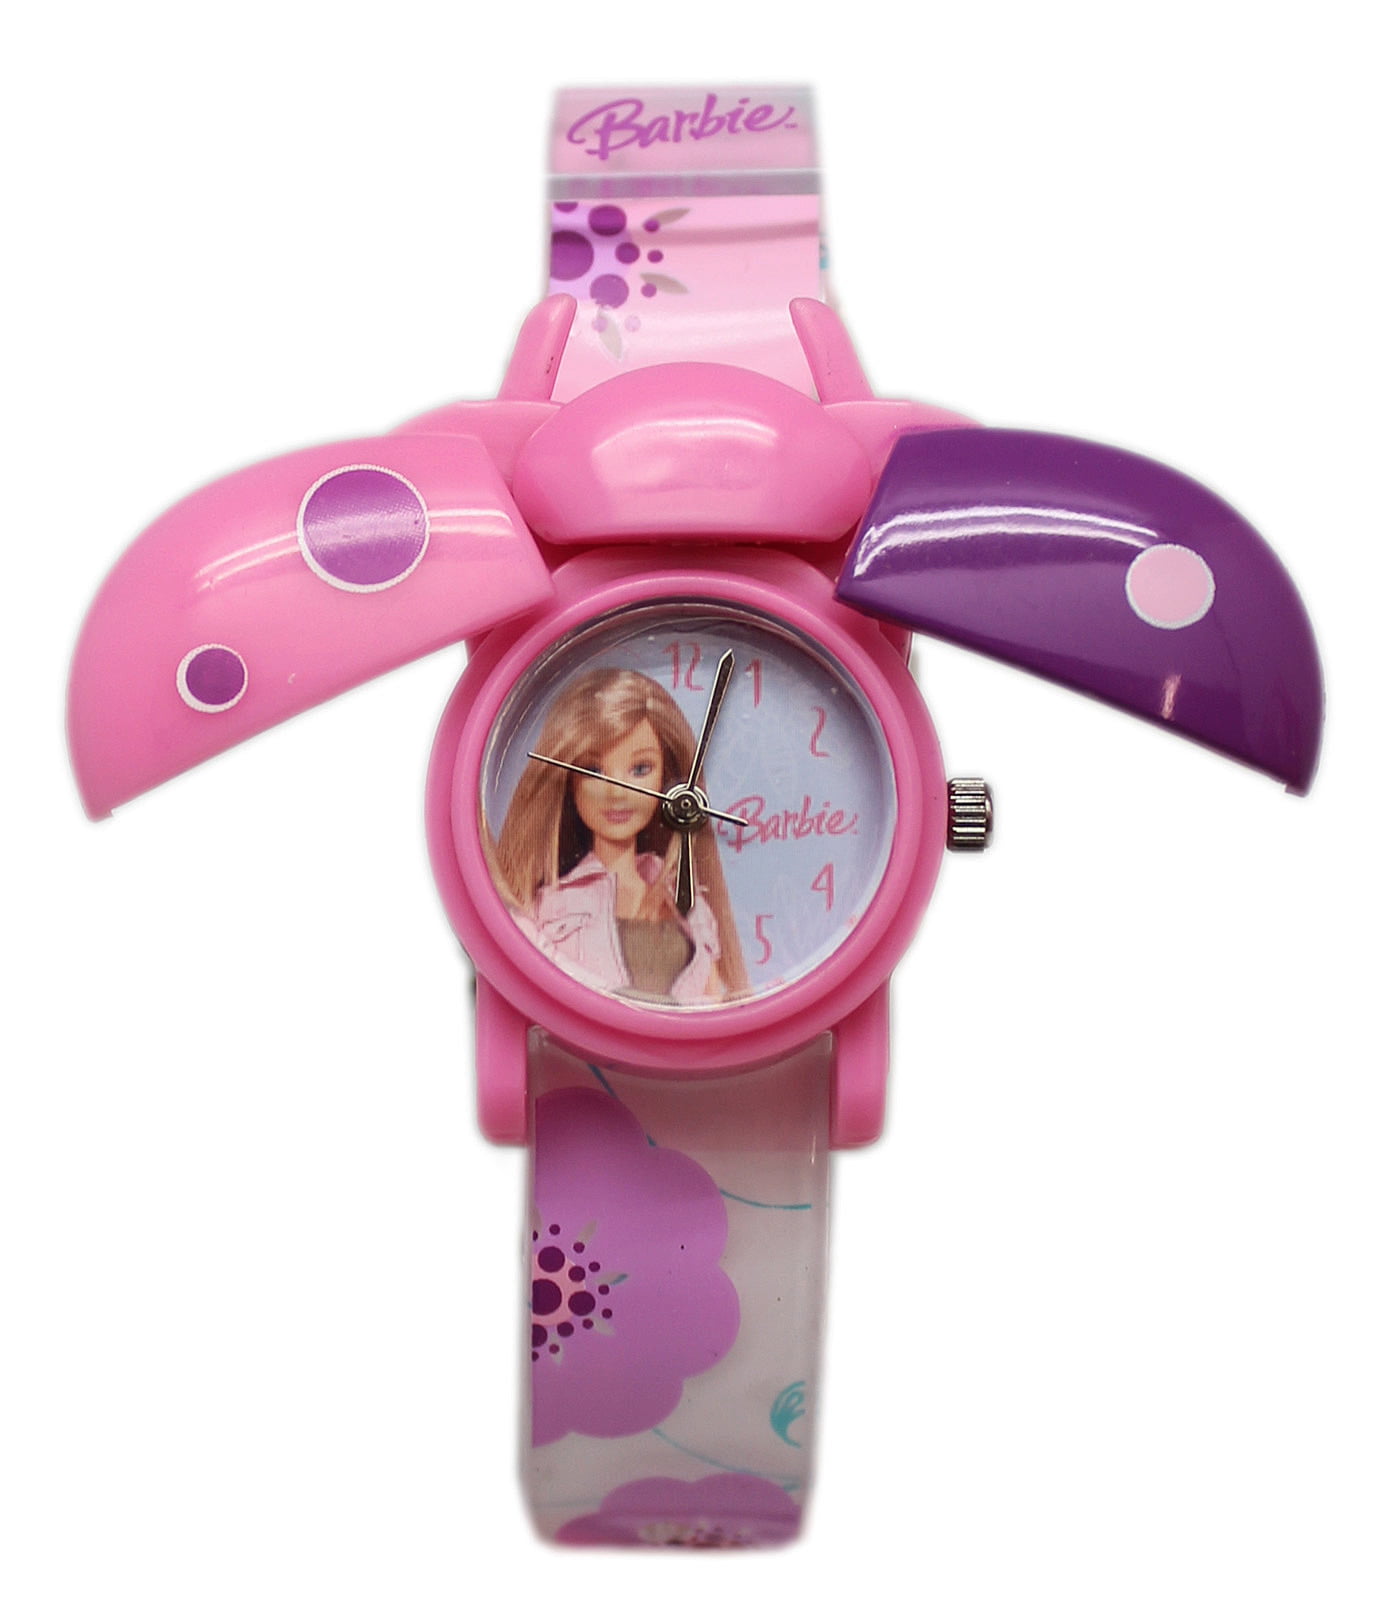 Barbie Barbie Beetle Watch Dial w/Interchangeable Bands and Bag Set